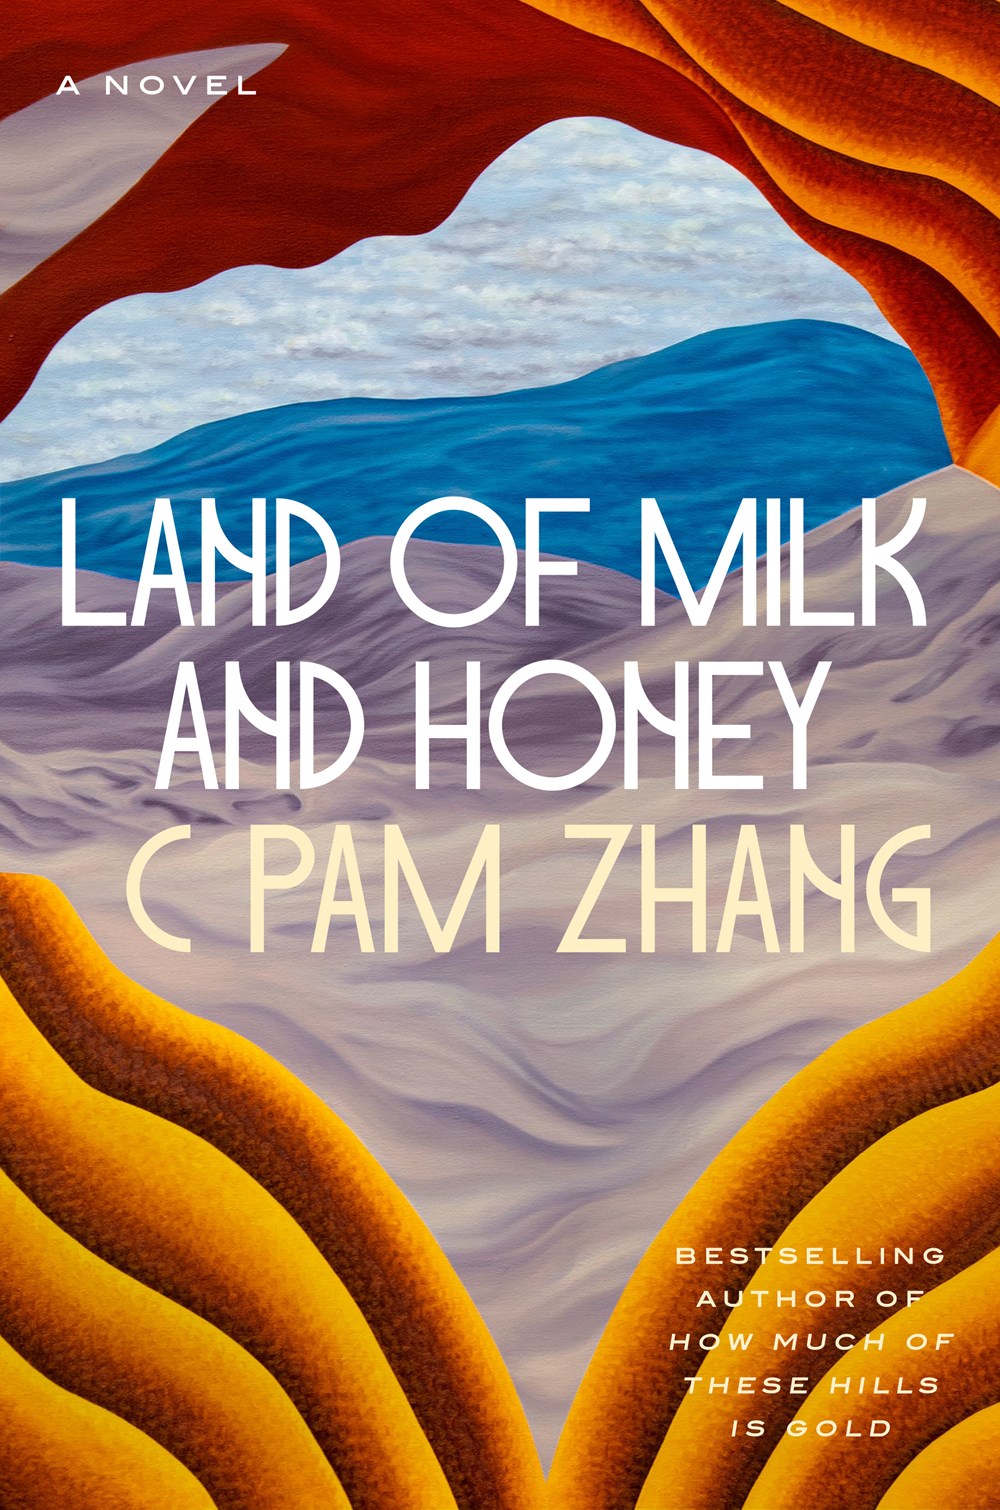 Land of Milk and Honey by C Pam Zhang (Hardcover) (PREORDER)